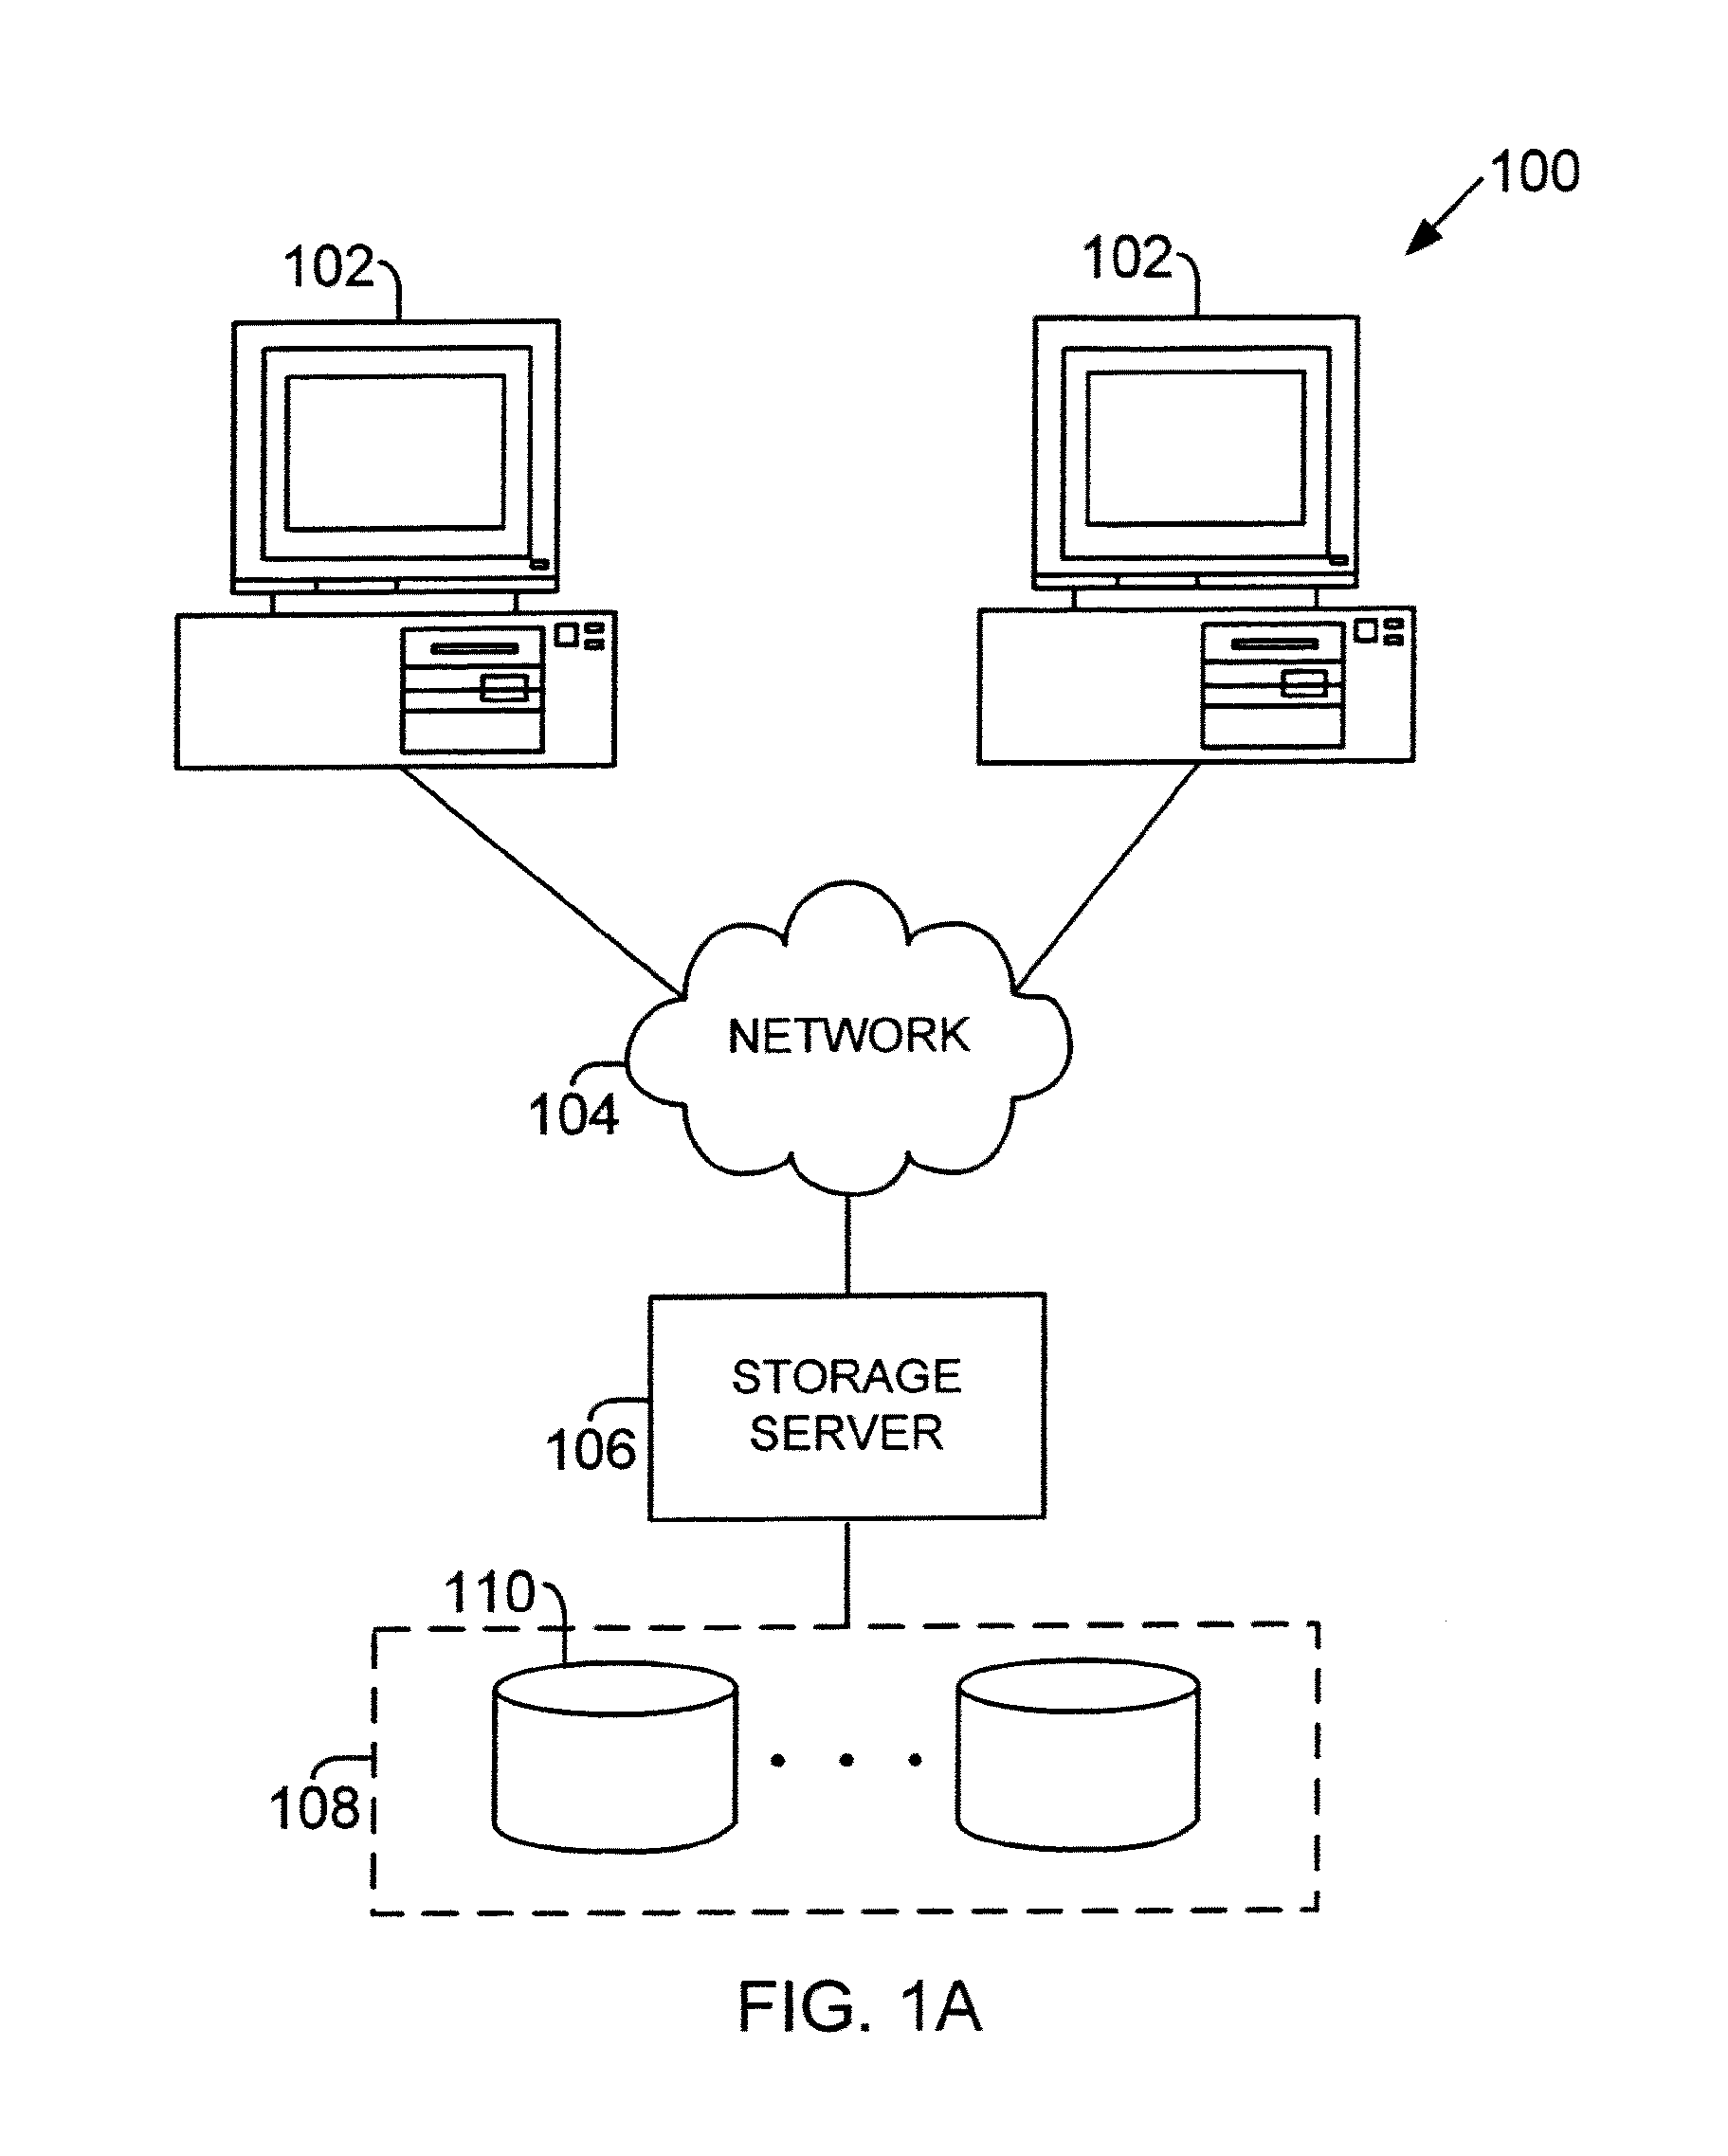 Method and system for minimizing unnecessary topology discovery operations by managing physical layer state change notifications in storage systems